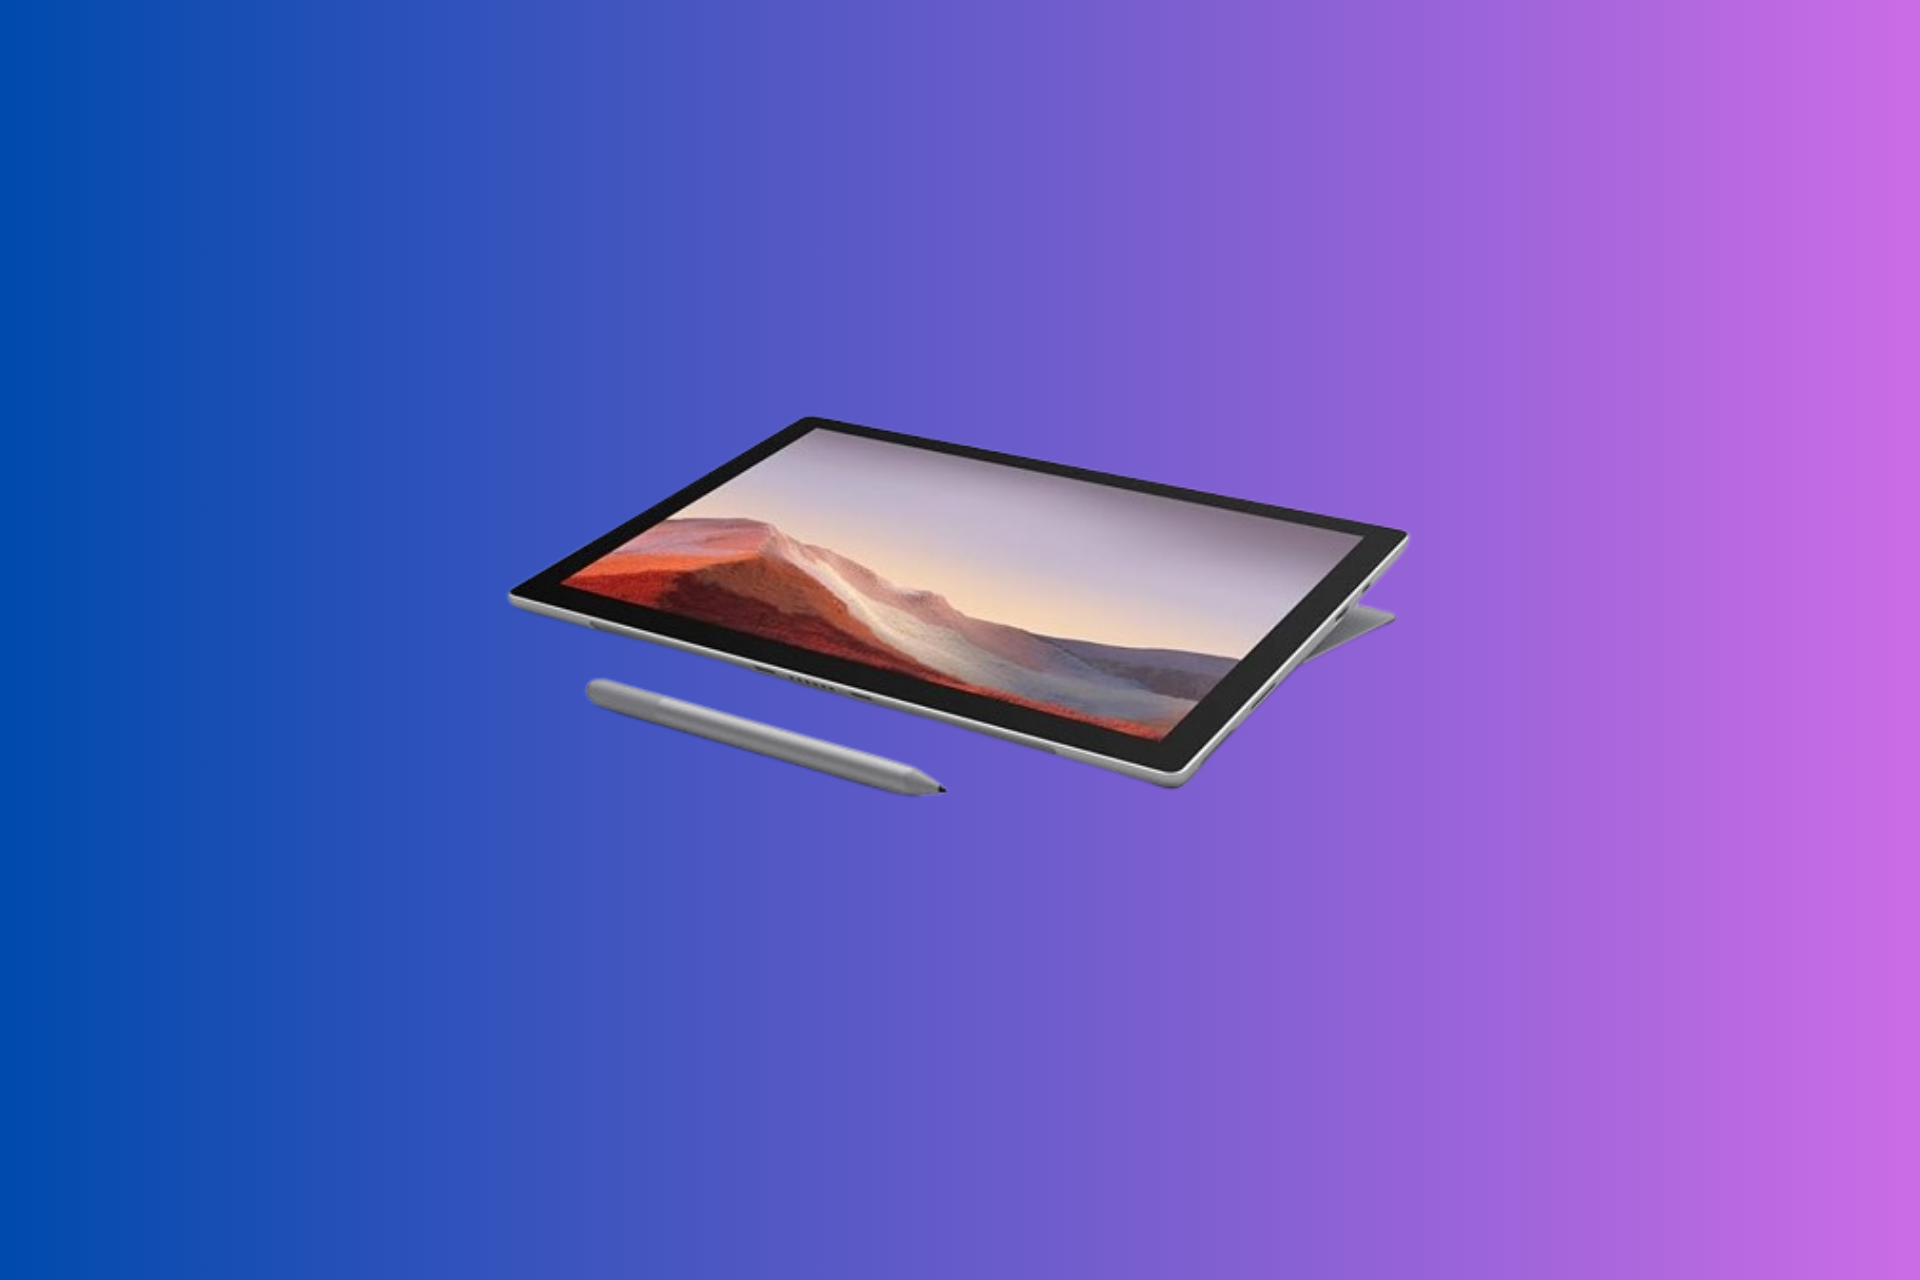 Microsoft releases a firmware update for Surface Pro 7 to fix overheating issues